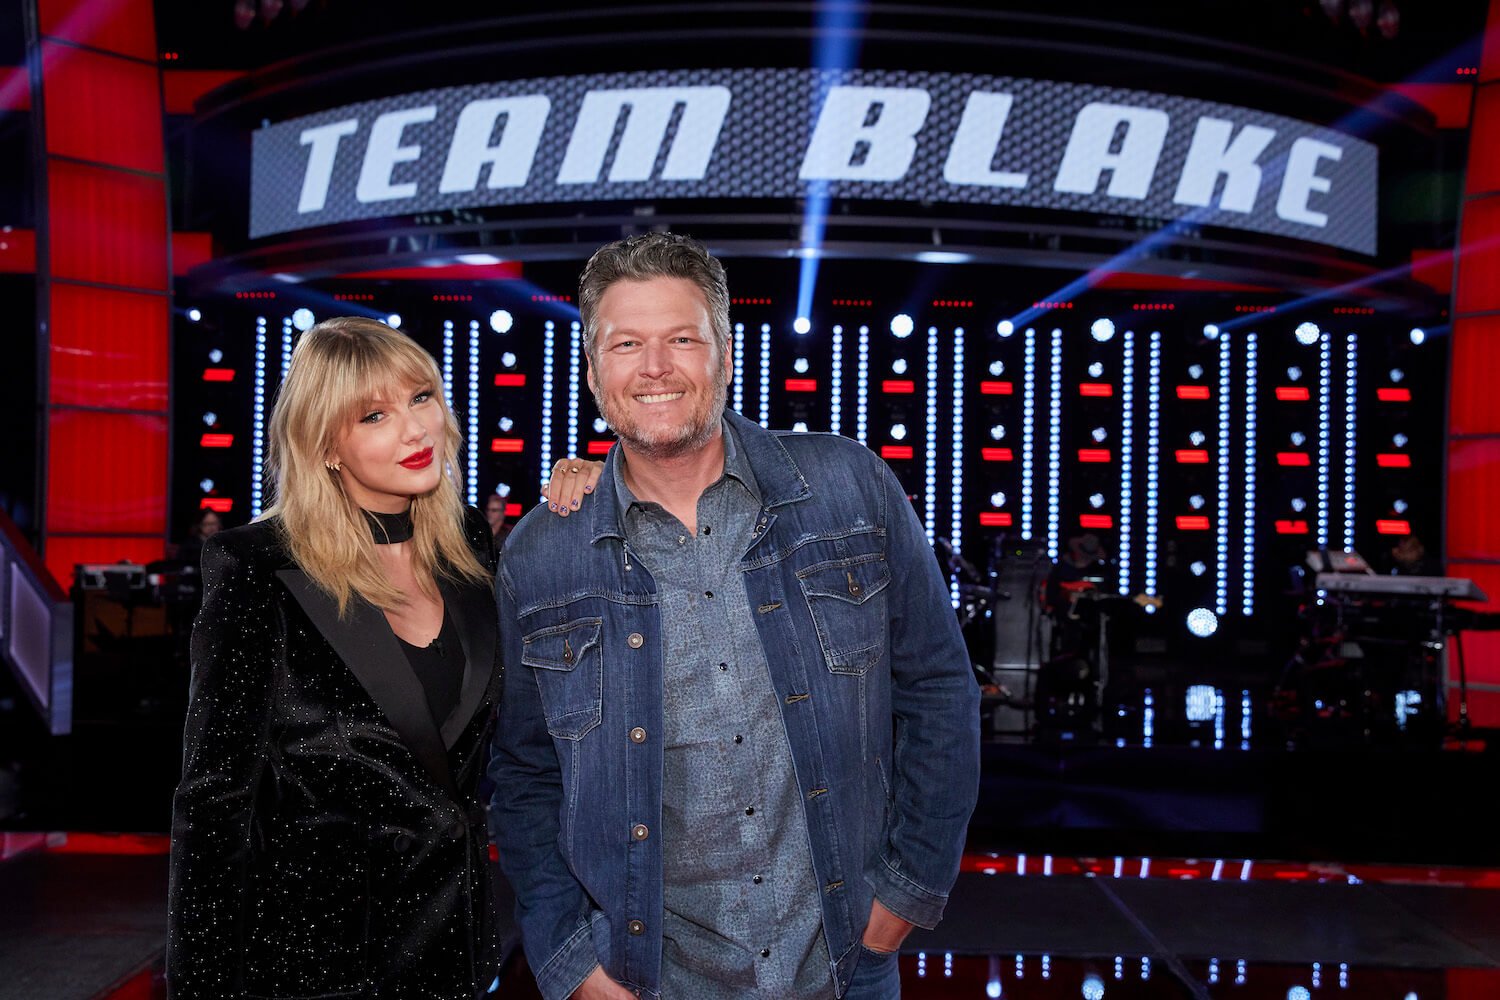 Taylor Swift and Blake Shelton with a 'Team Blake' banner behind them in 'The Voice'